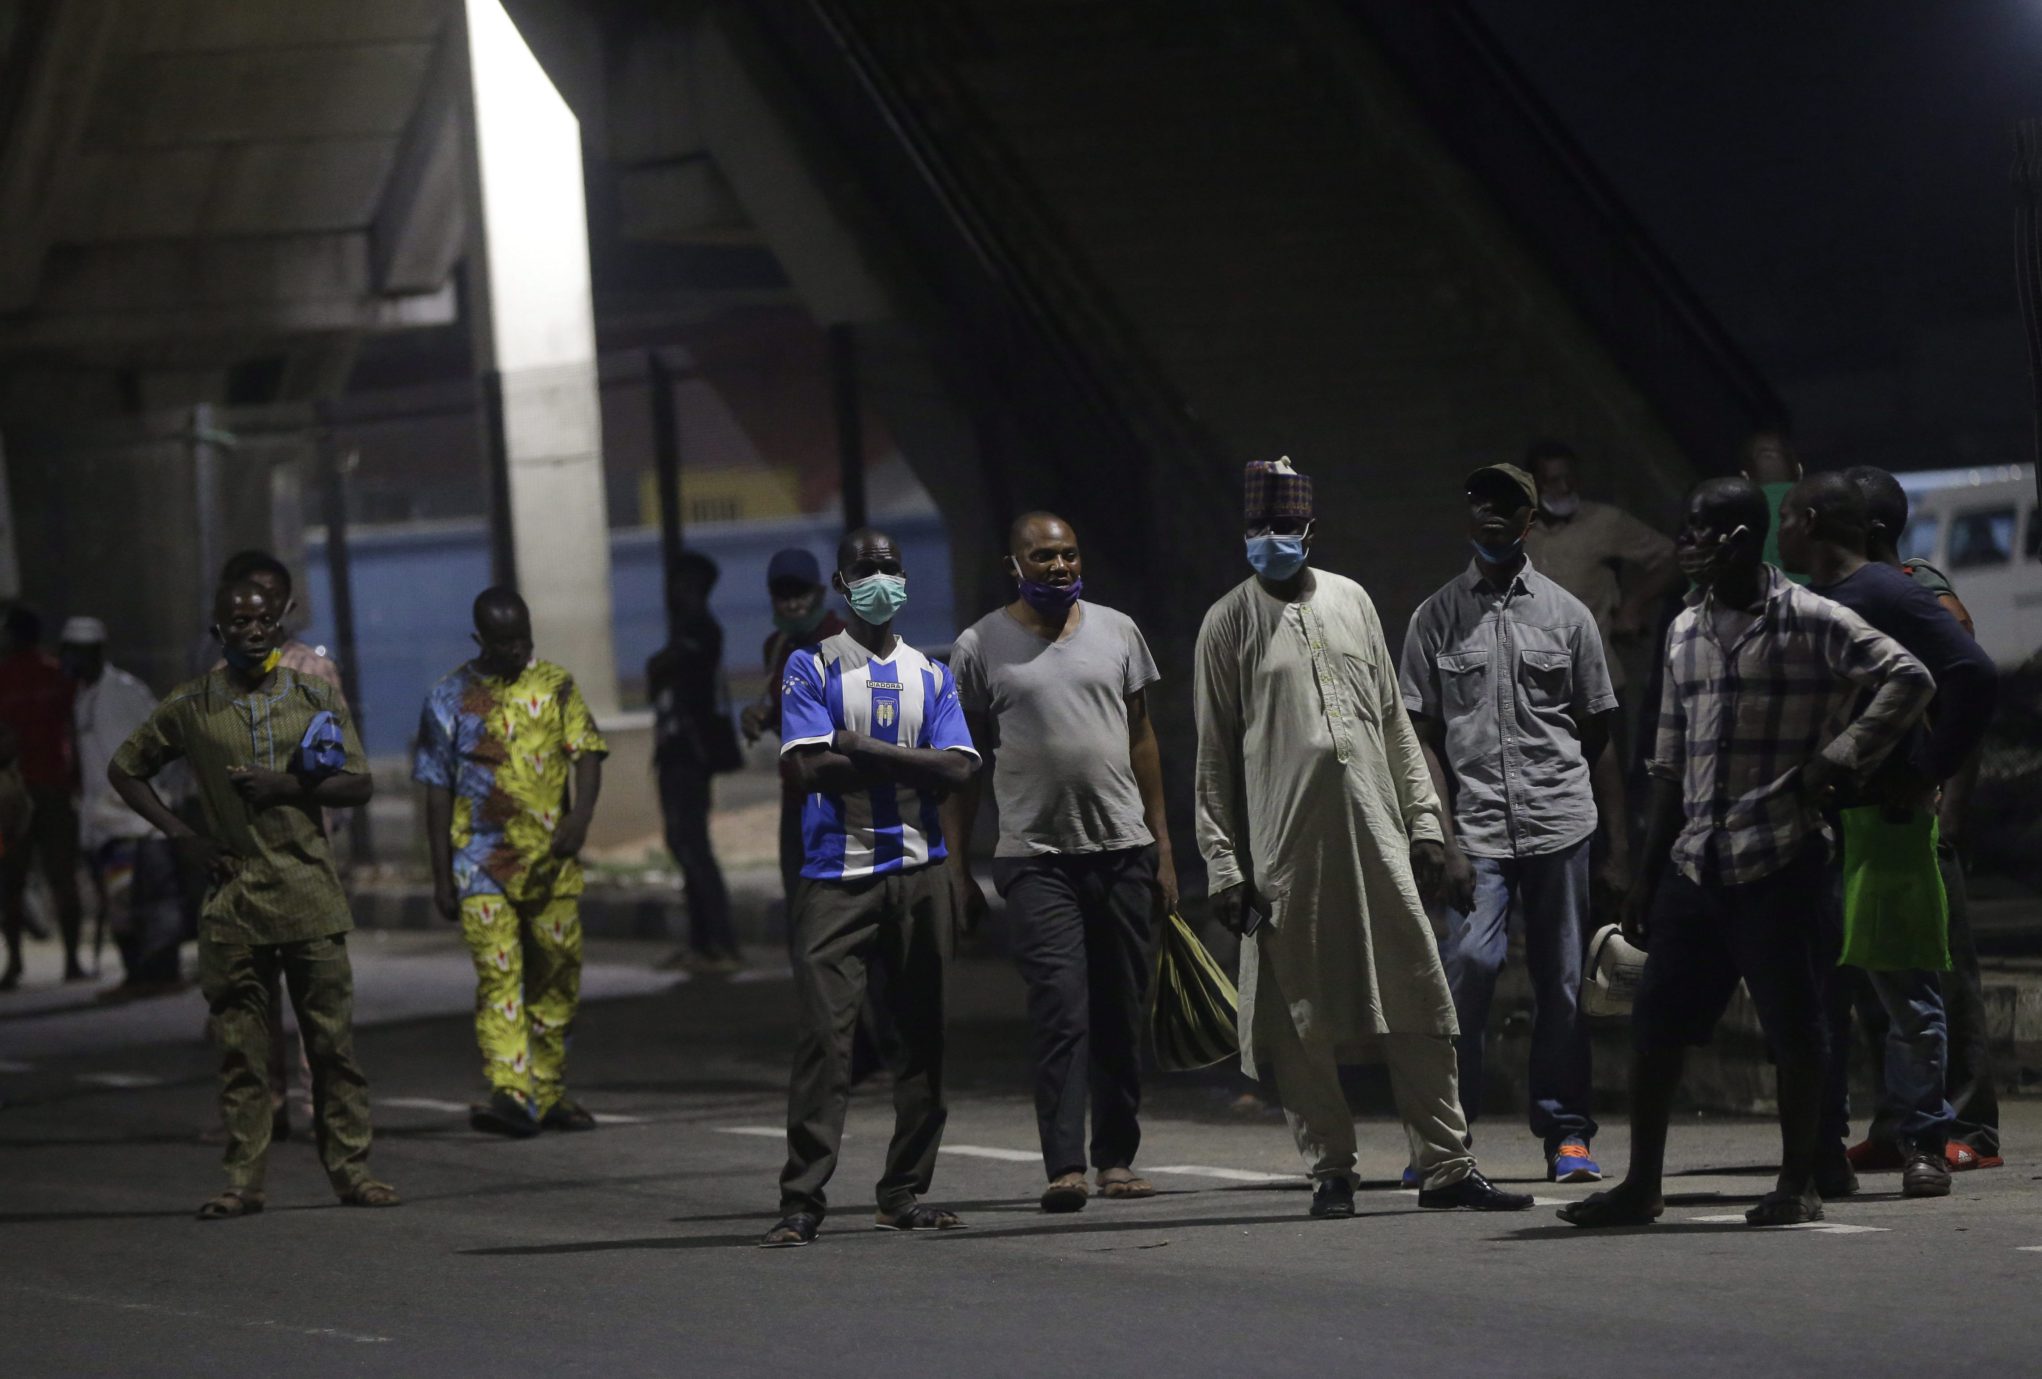 People stand at a bus stop after curfew in Lagos Nigeria.